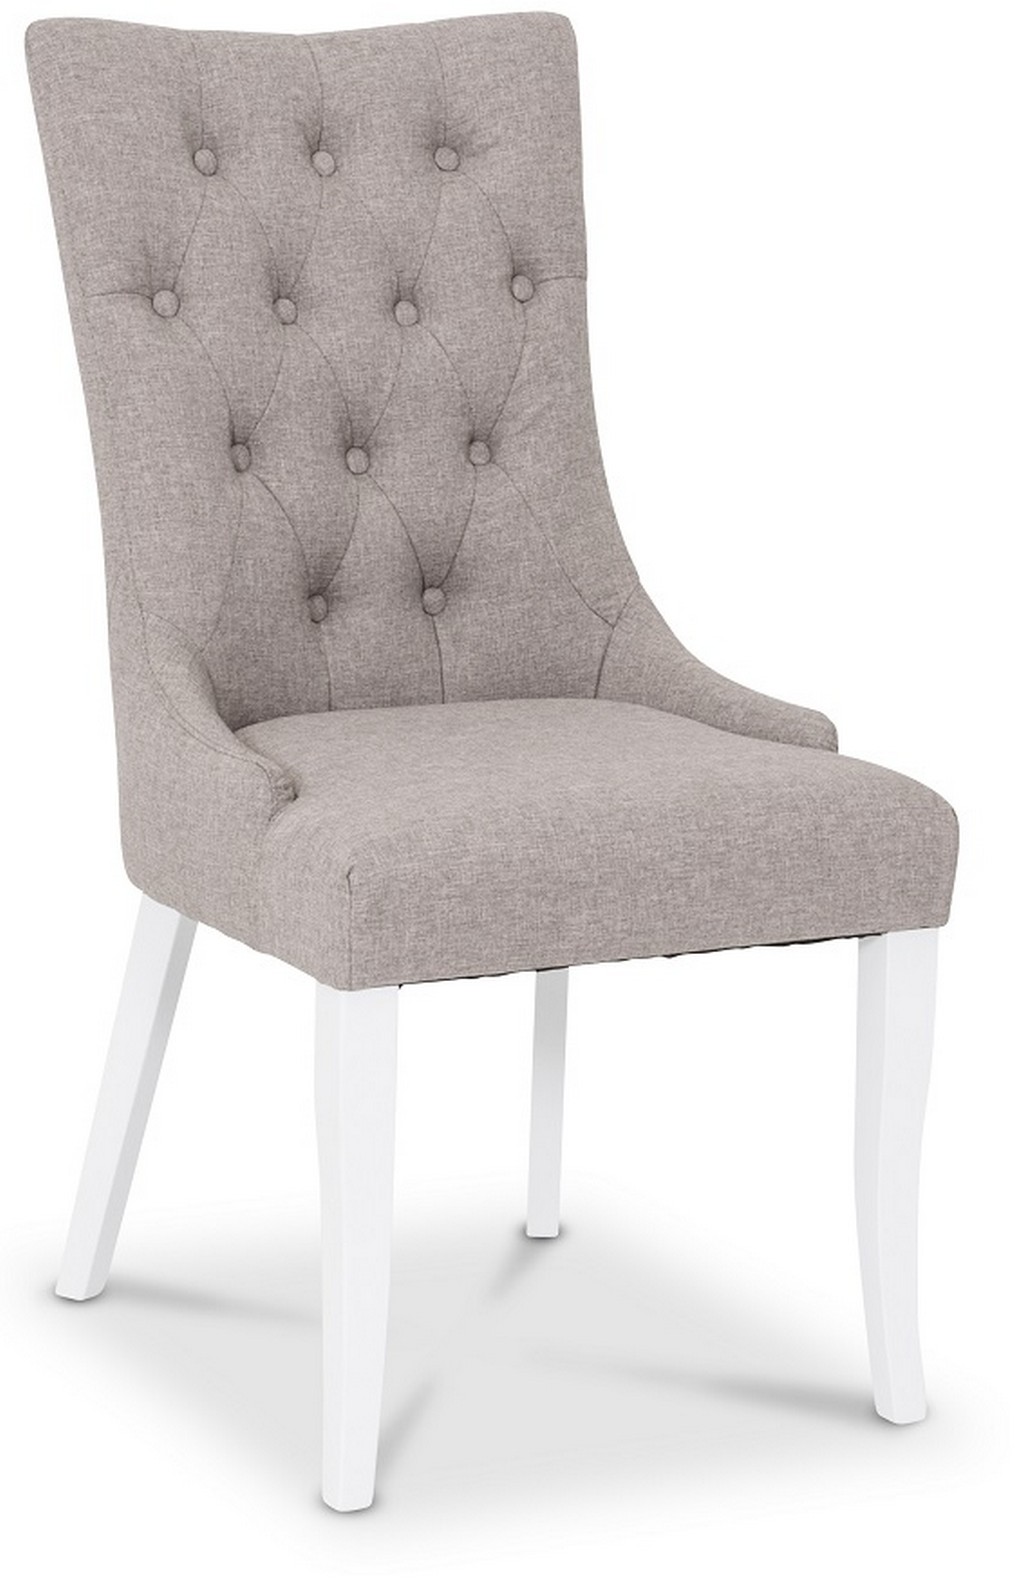 opladning gjorde det tage Saga dining chair, coco fabric